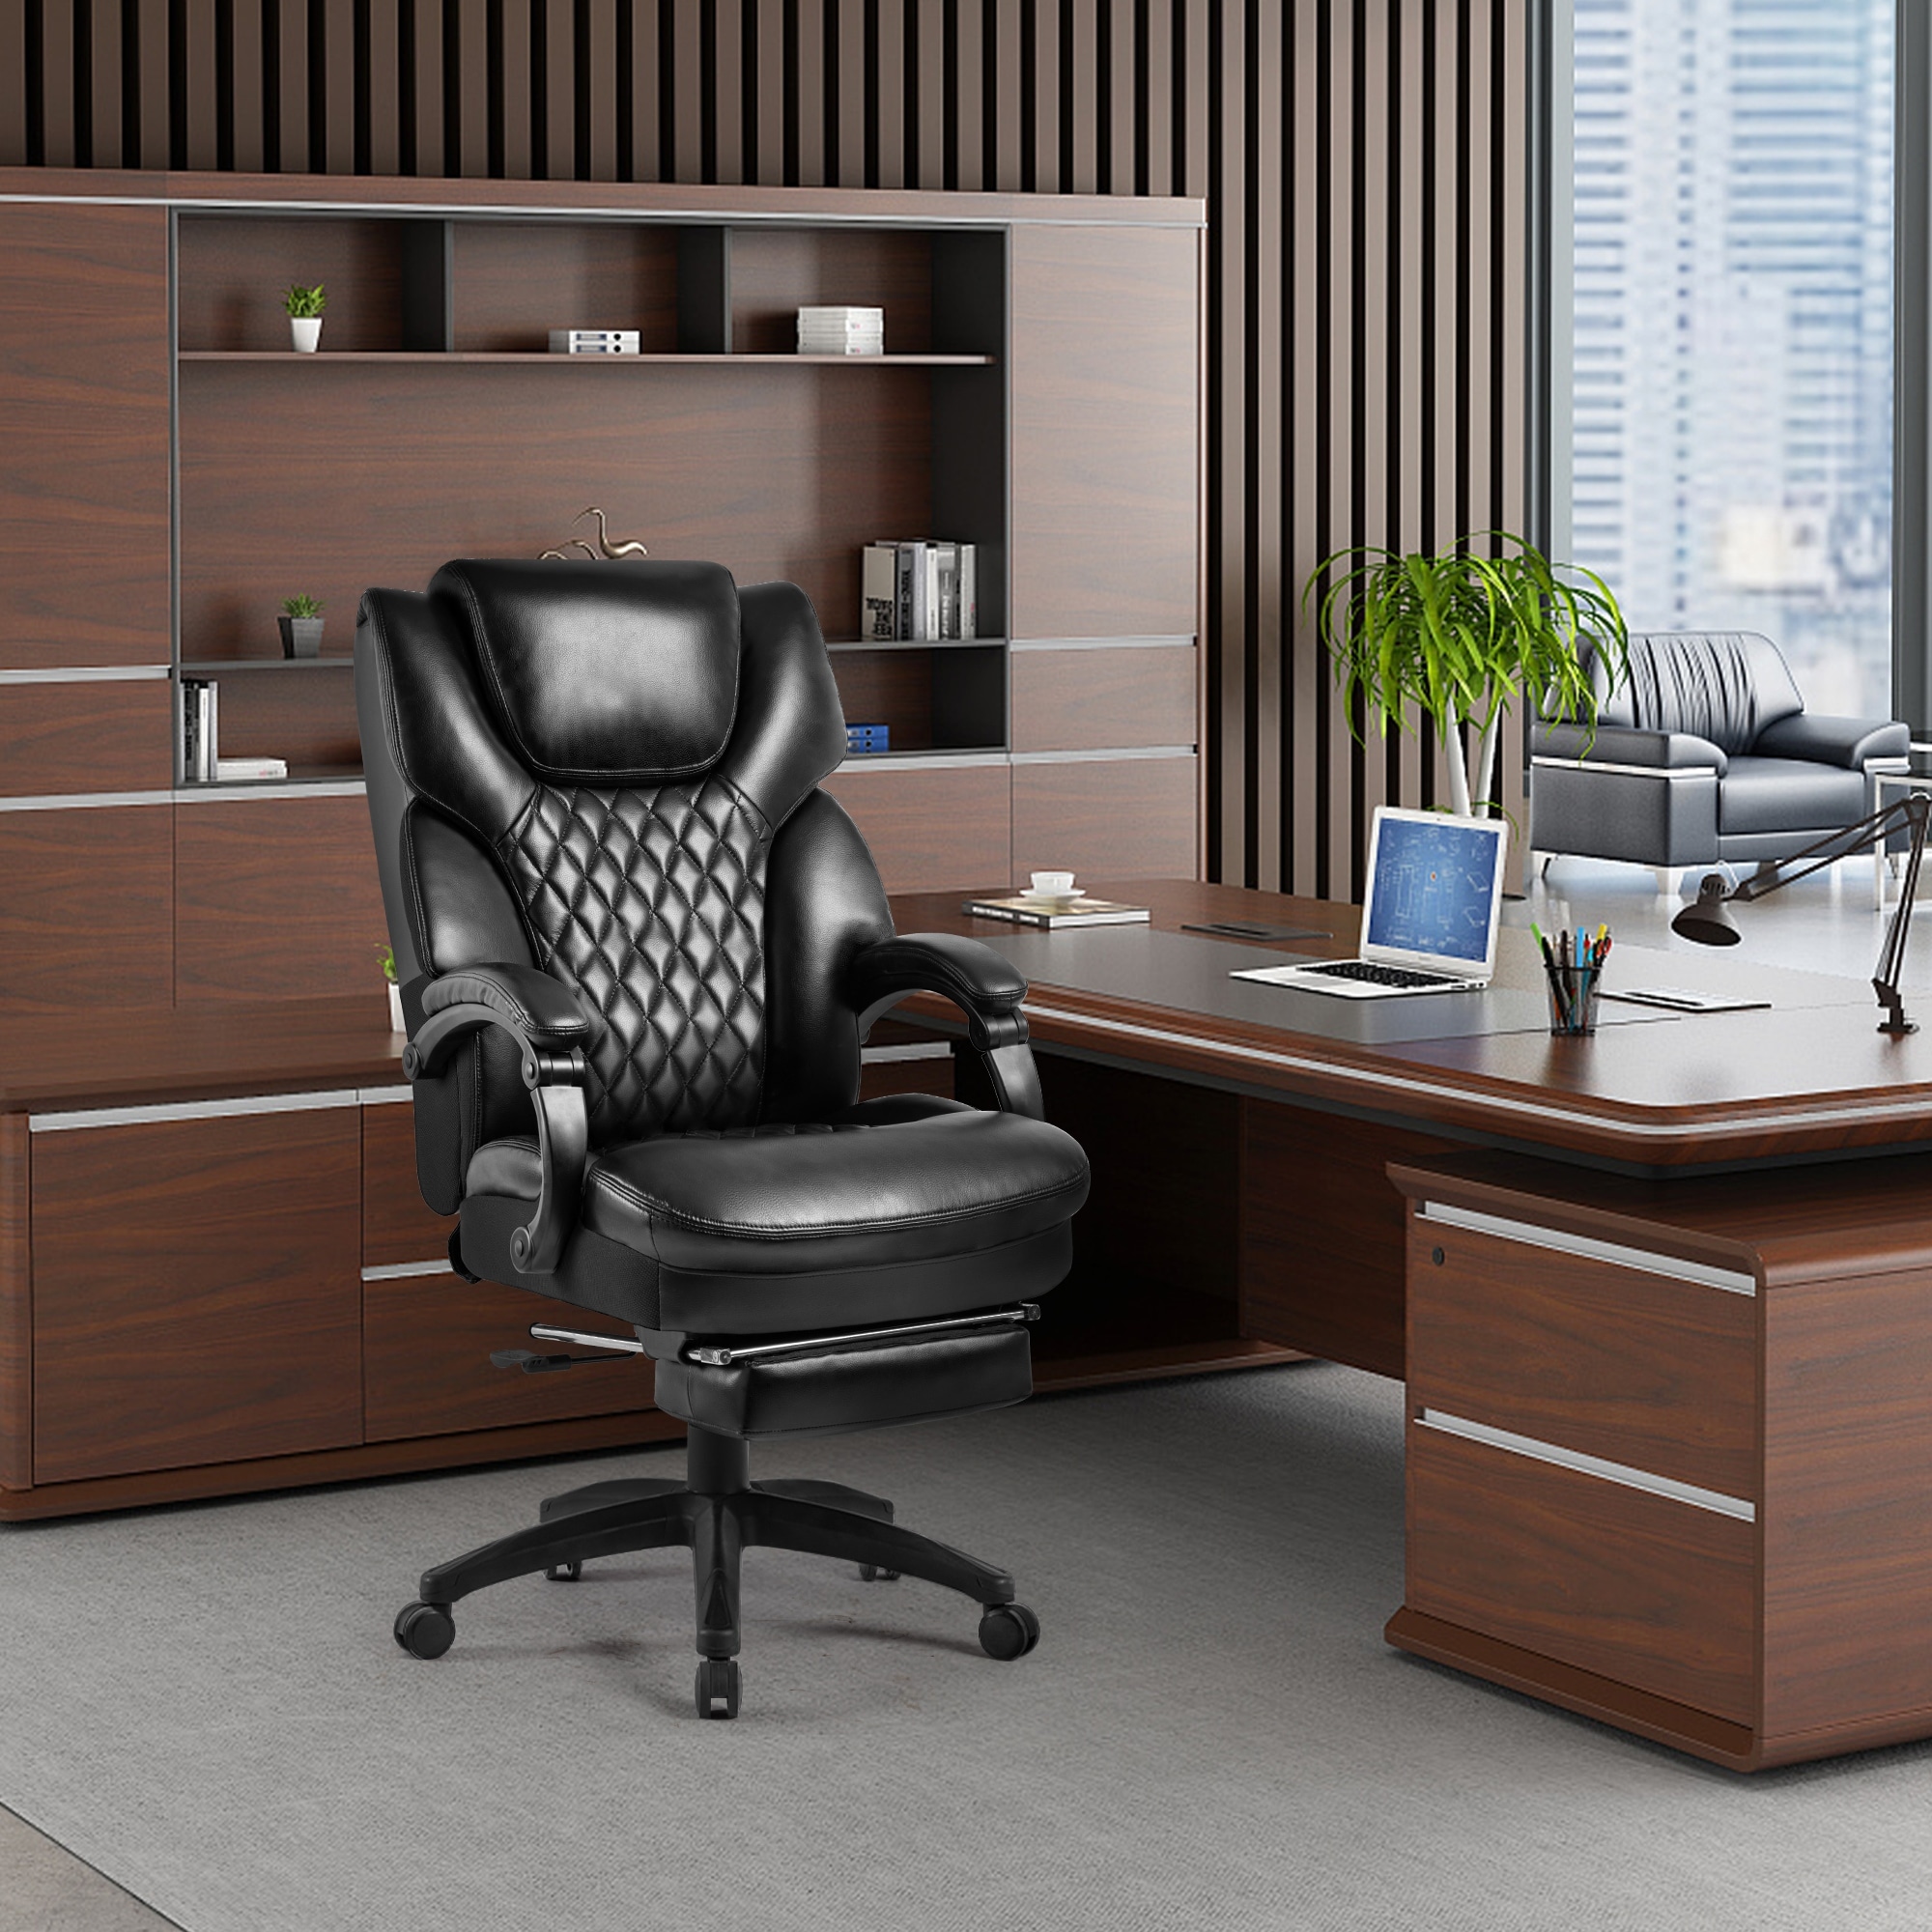 https://ak1.ostkcdn.com/images/products/is/images/direct/9d6082c025f451a7dee01321b9764d0b0acf453a/400lbs-Big-%26-Tall-Office-Chair%2C-Heavy-Duty-Office-Executive-Swivel-Chair.jpg